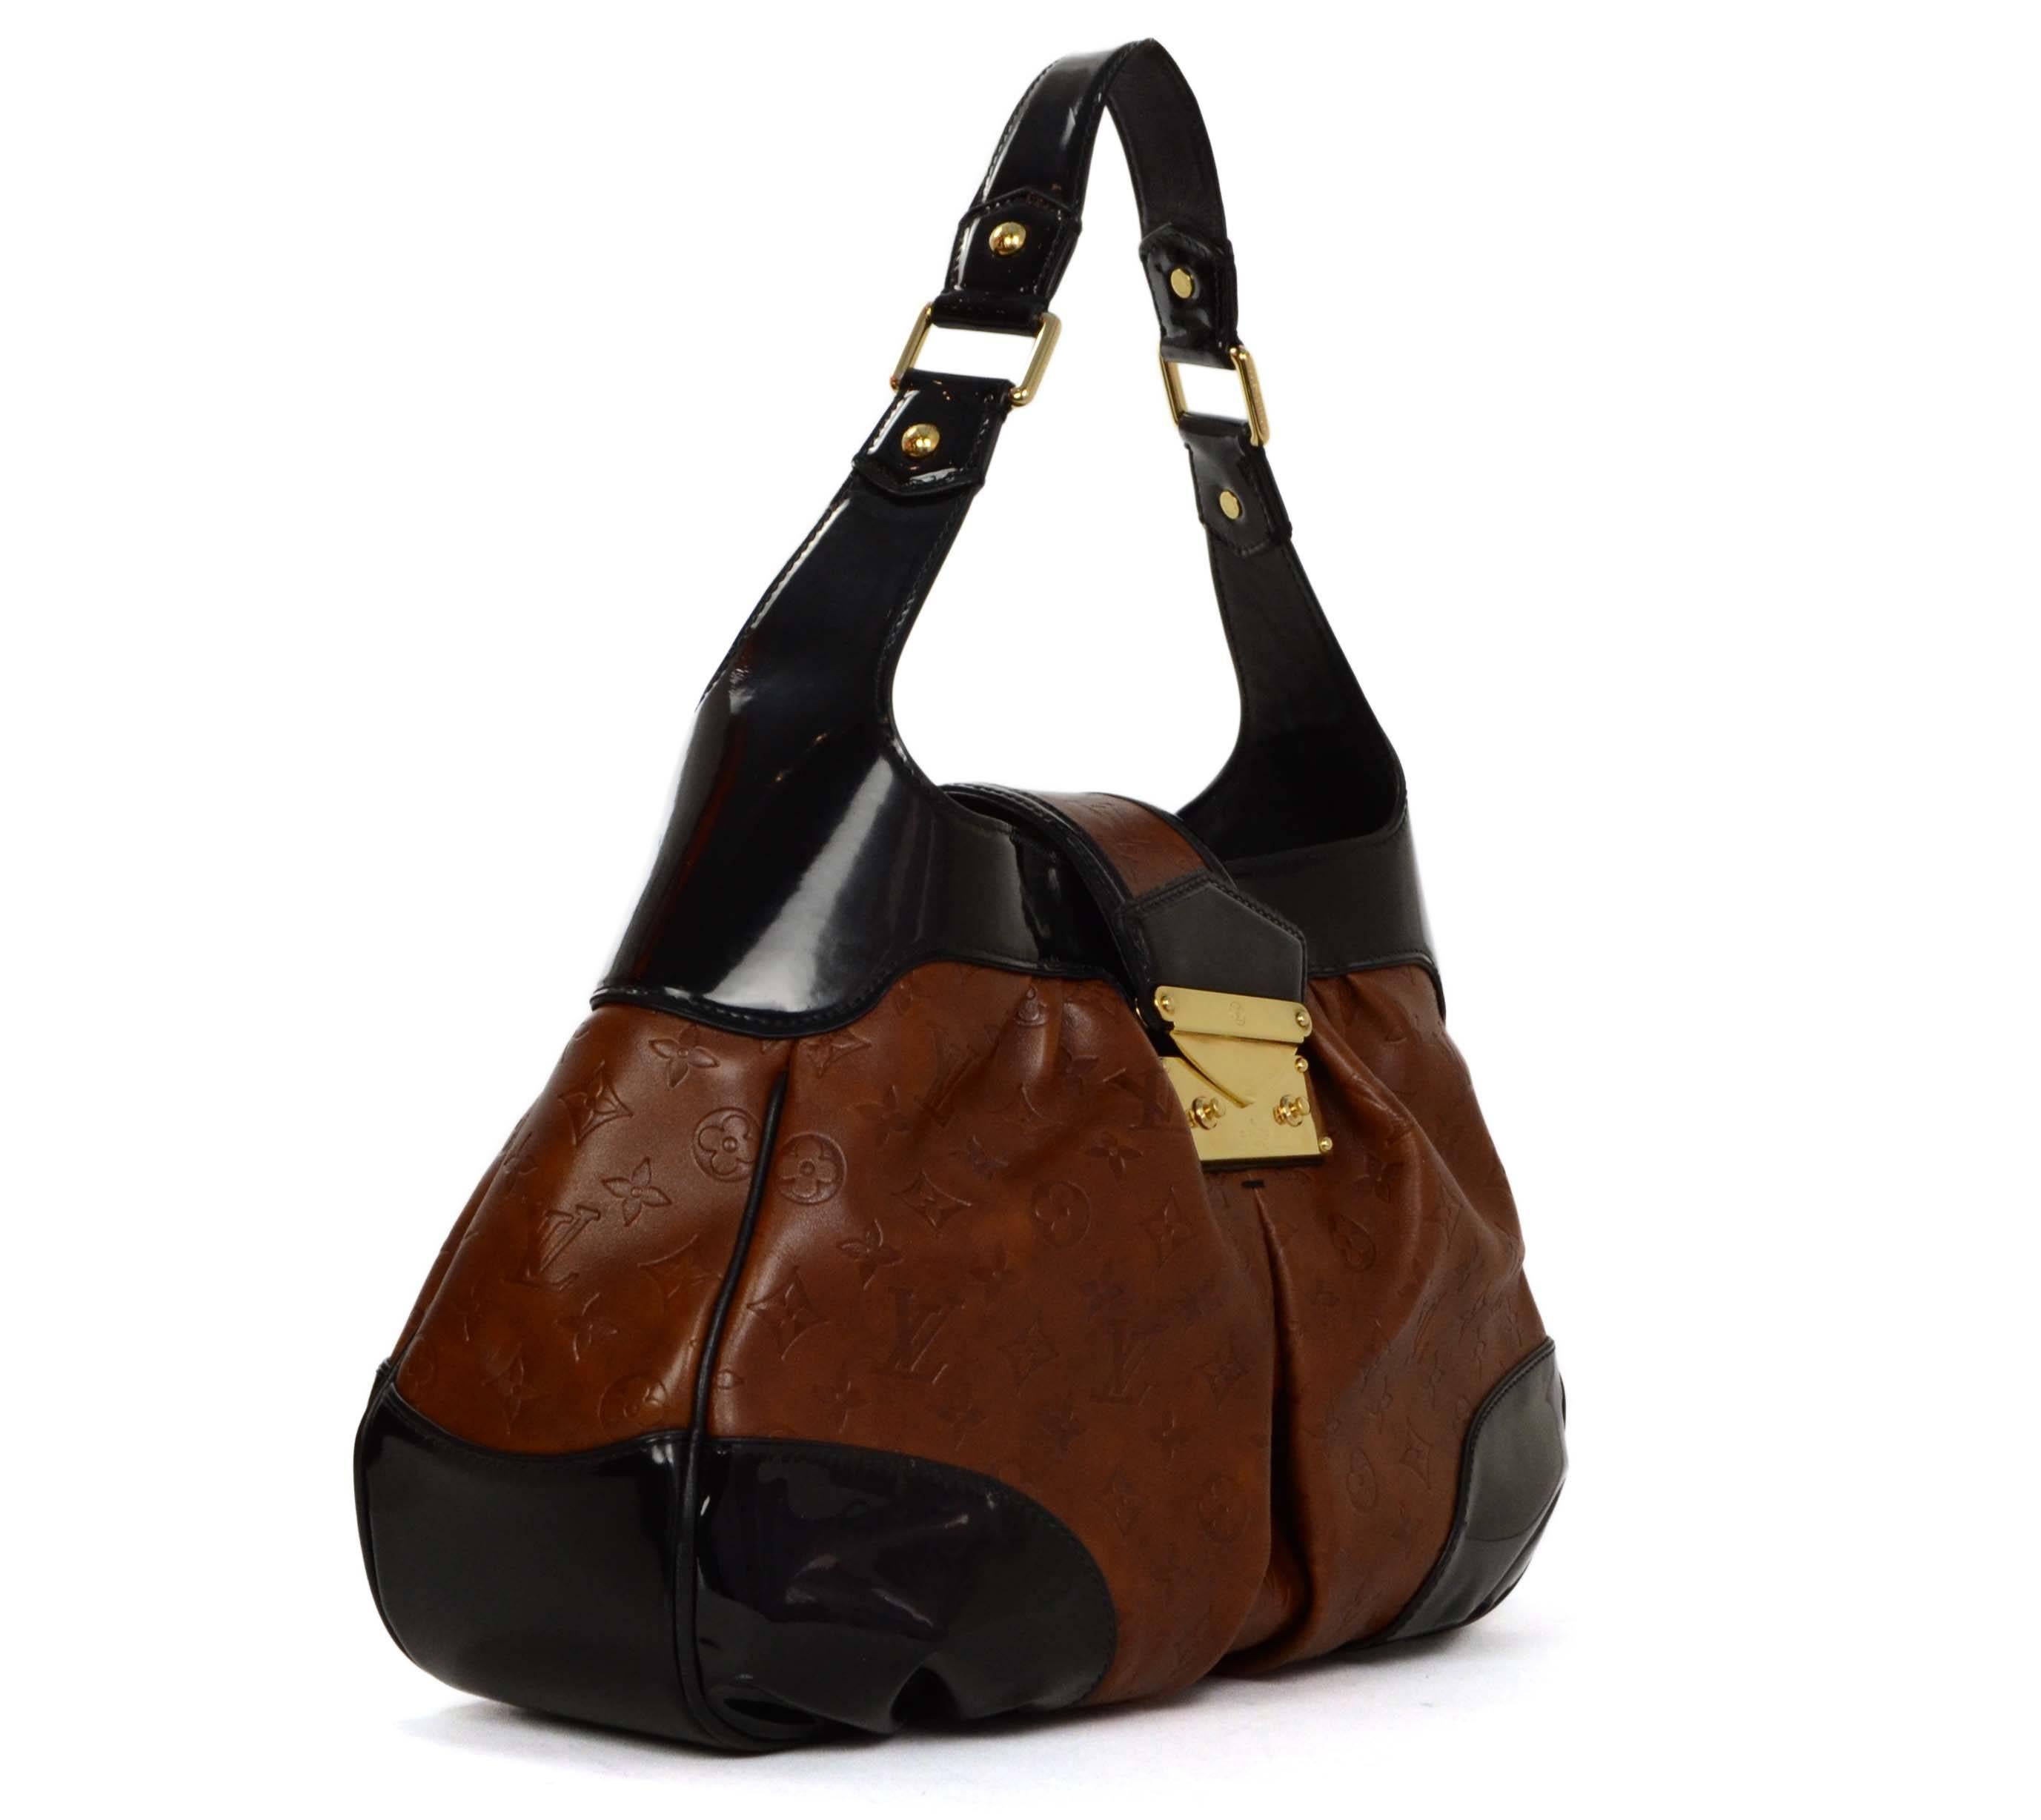 Louis Vuitton Brown Empriente Leather 'Polly' Bag 
Features black patent trim and shoulder strap
Made In: France
Year of Production: 2006
Color: Brown and black
Hardware: Goldtone
Materials: Leather, patent leather and metal
Lining: Black